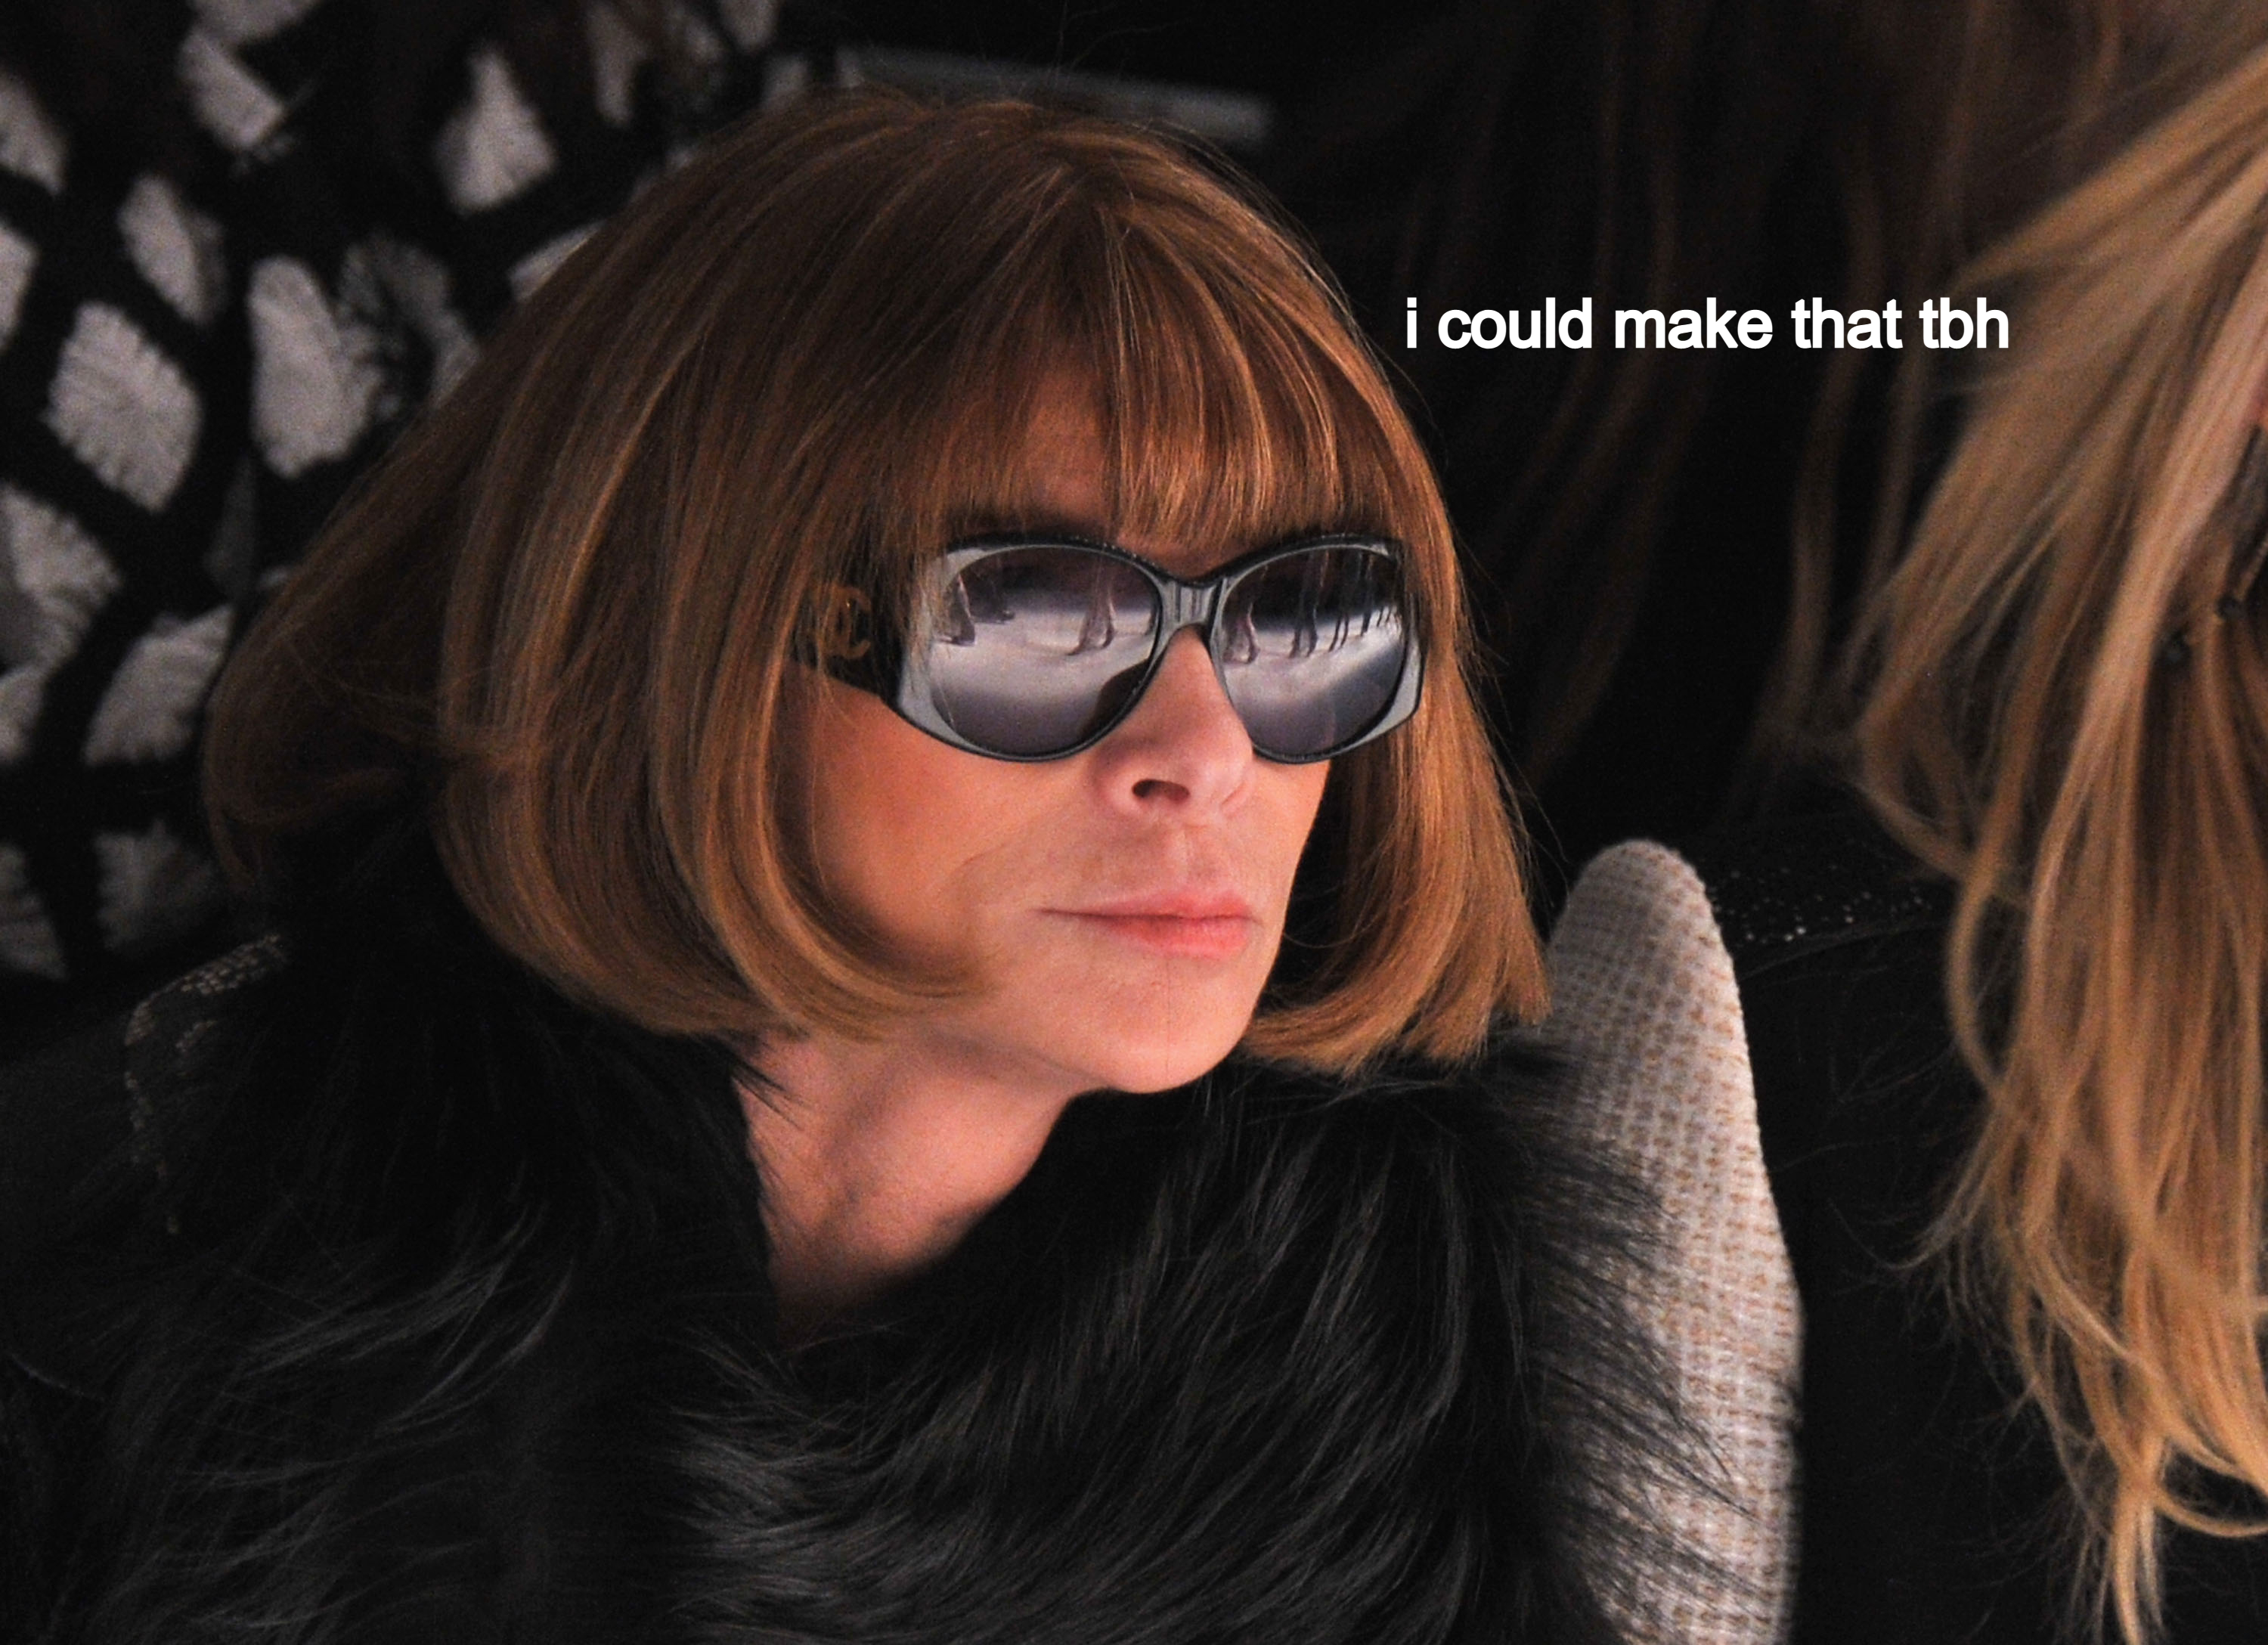 Live Yr Anna Wintour Dream Thanks To These Free Fashion & Branding Workshops